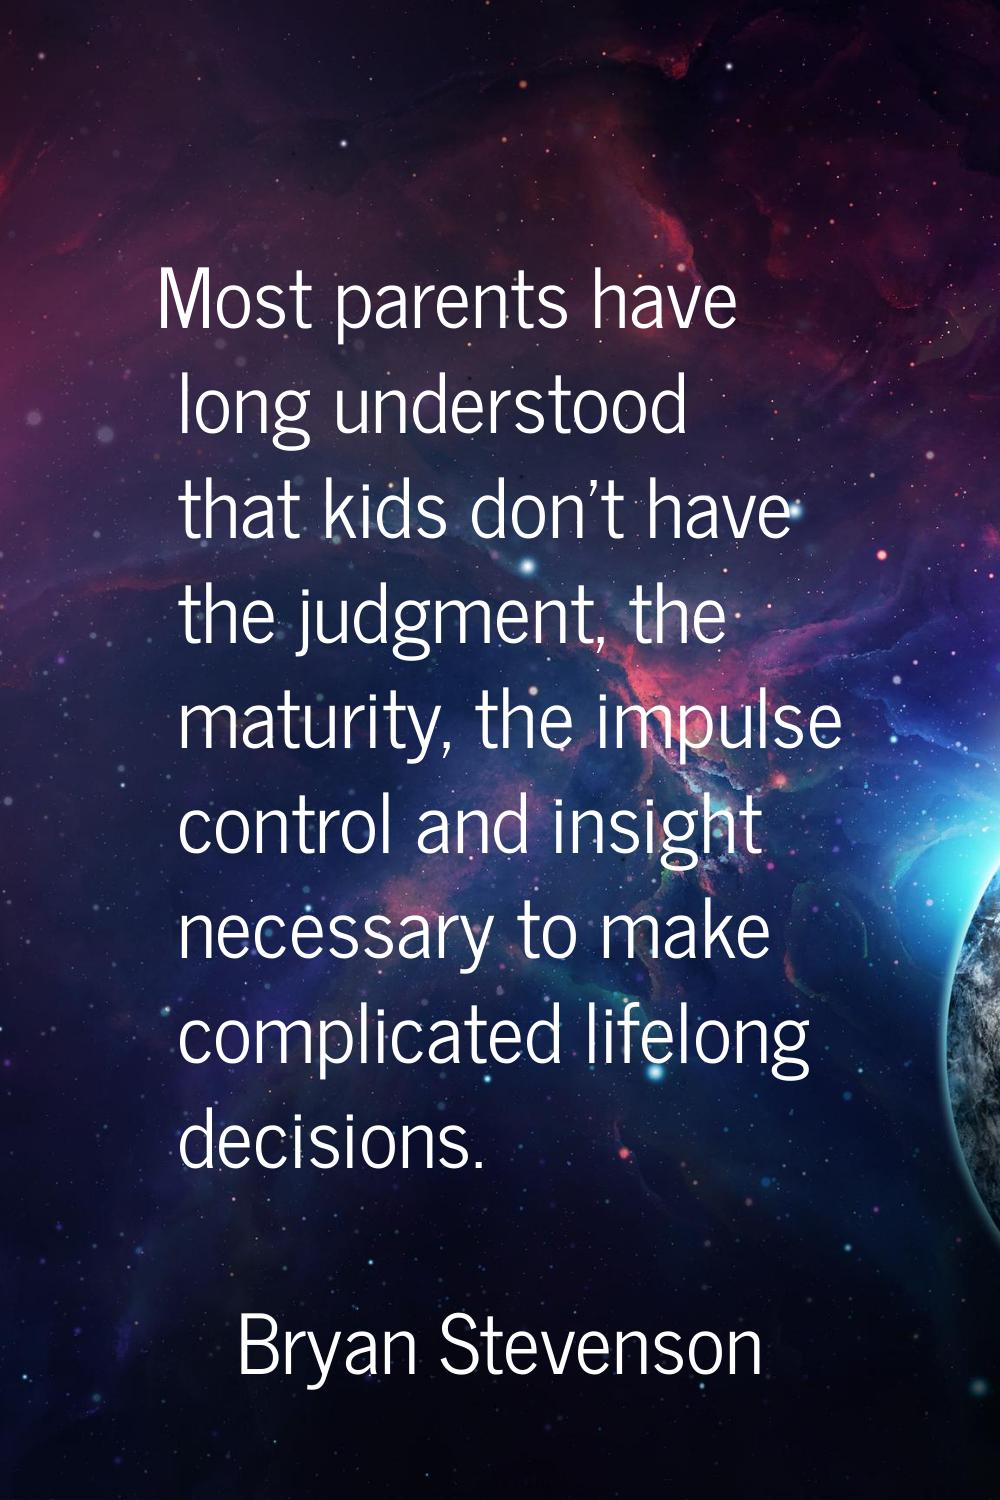 Most parents have long understood that kids don't have the judgment, the maturity, the impulse cont